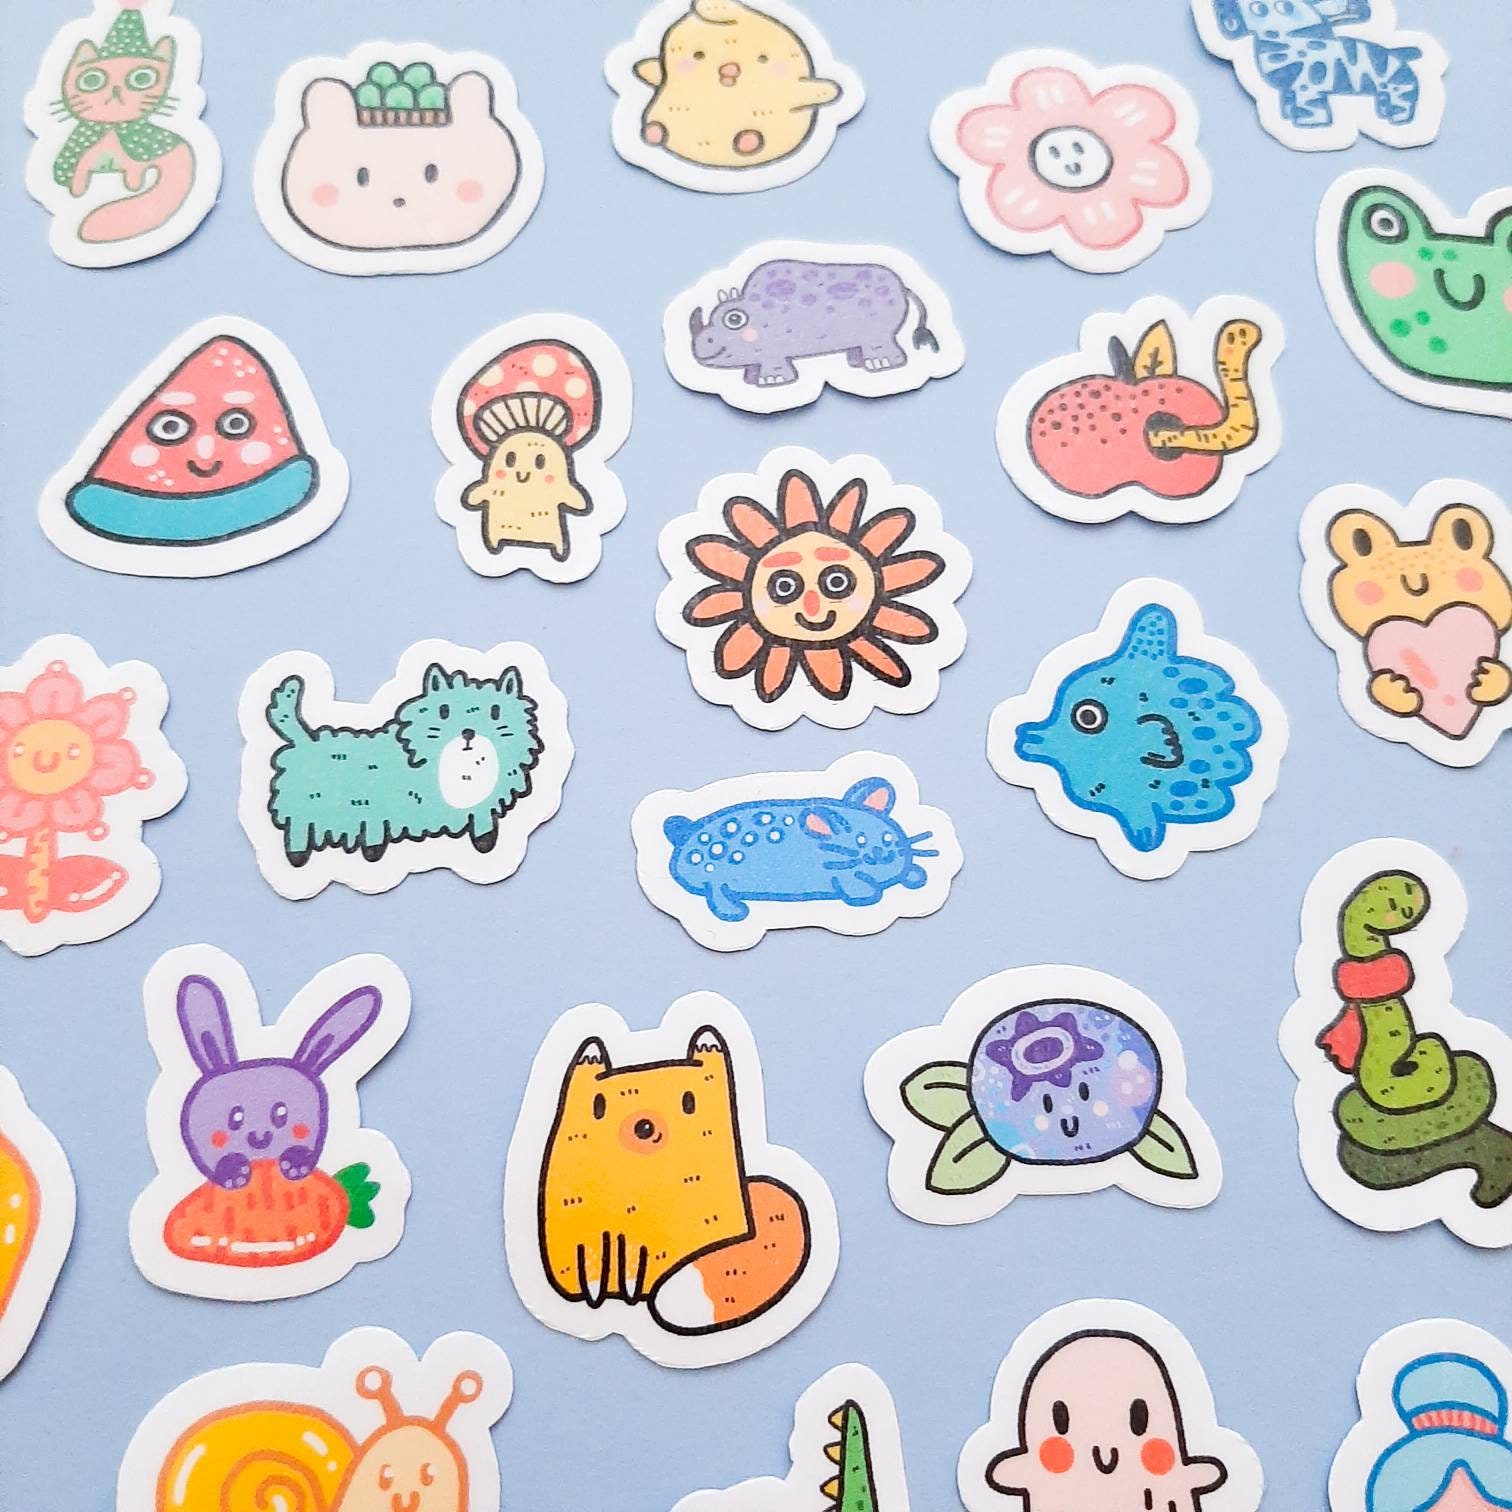 Mini Stickers for Planner, Tiny Stickers for Laptop, Small